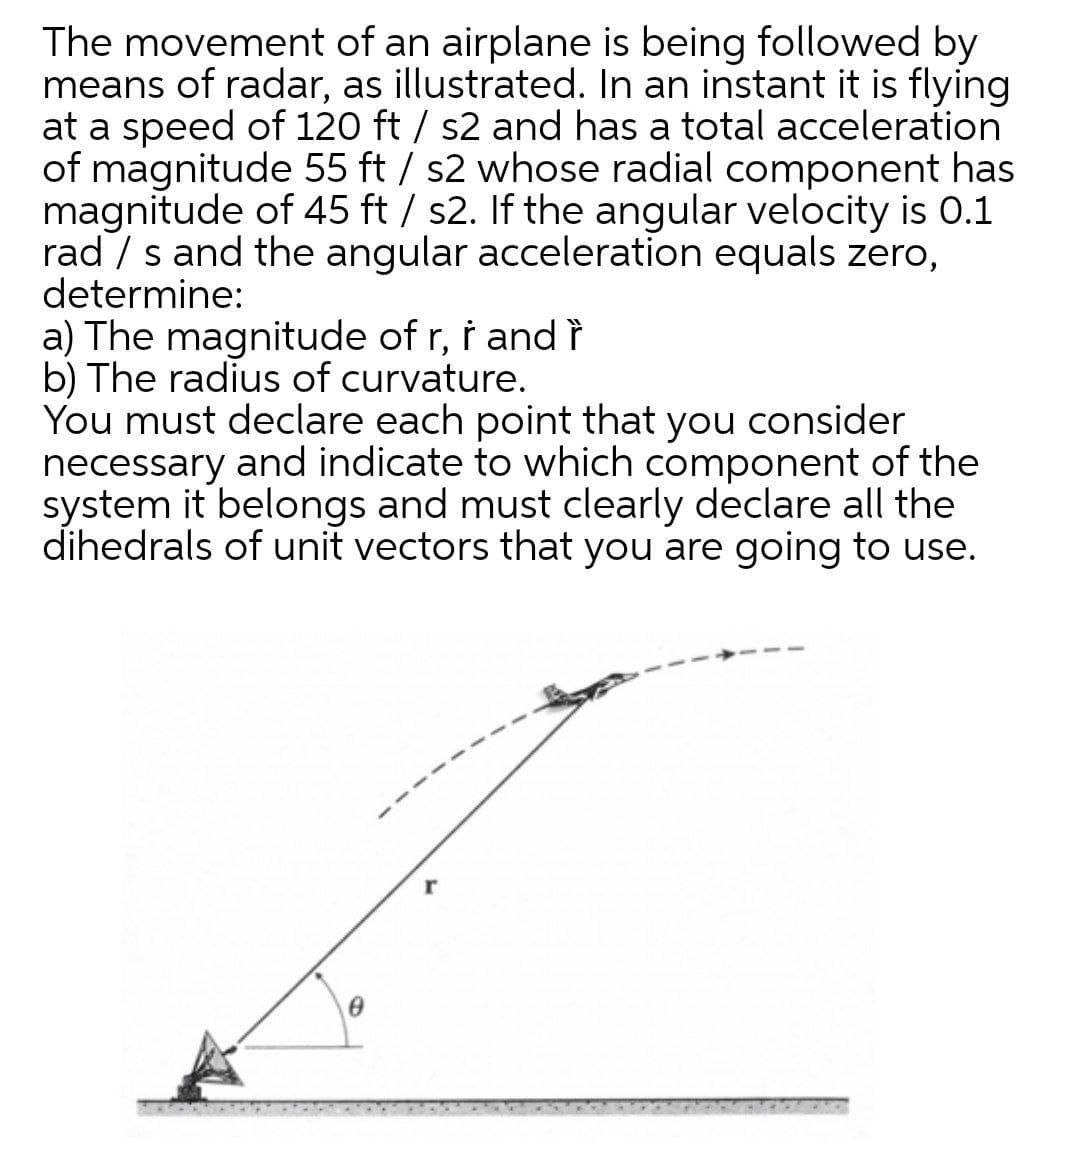 The movement of an airplane is being followed by
means of radar, as illustrated. In an instant it is flying
at a speed of 120 ft / s2 and has a total acceleration
of magnitude 55 ft / s2 whose radial component has
magnitude of 45 ft / s2. If the angular velocity is 0.1
rad / s and the angular acceleration equals zero,
determine:
a) The magnitude of r, i and ?
b) The radius of curvature.
You must declare each point that you consider
necessary and indicate to which component of the
system it belongs and must clearly declare all the
dihedrals of unit vectors that you are going to use.
